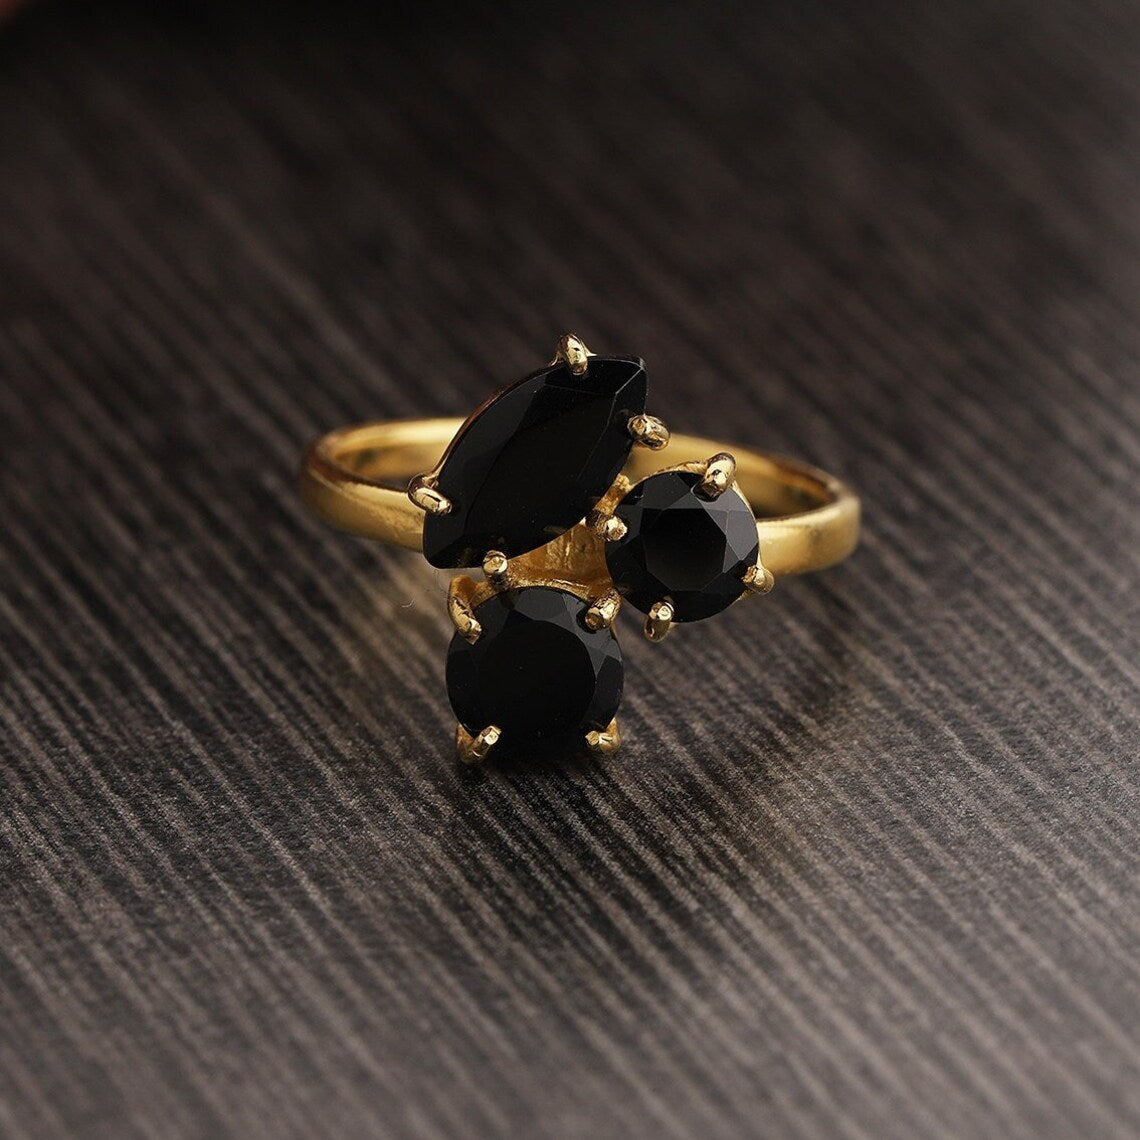 925 Sterling Silver Ring with Black Onyx Stone